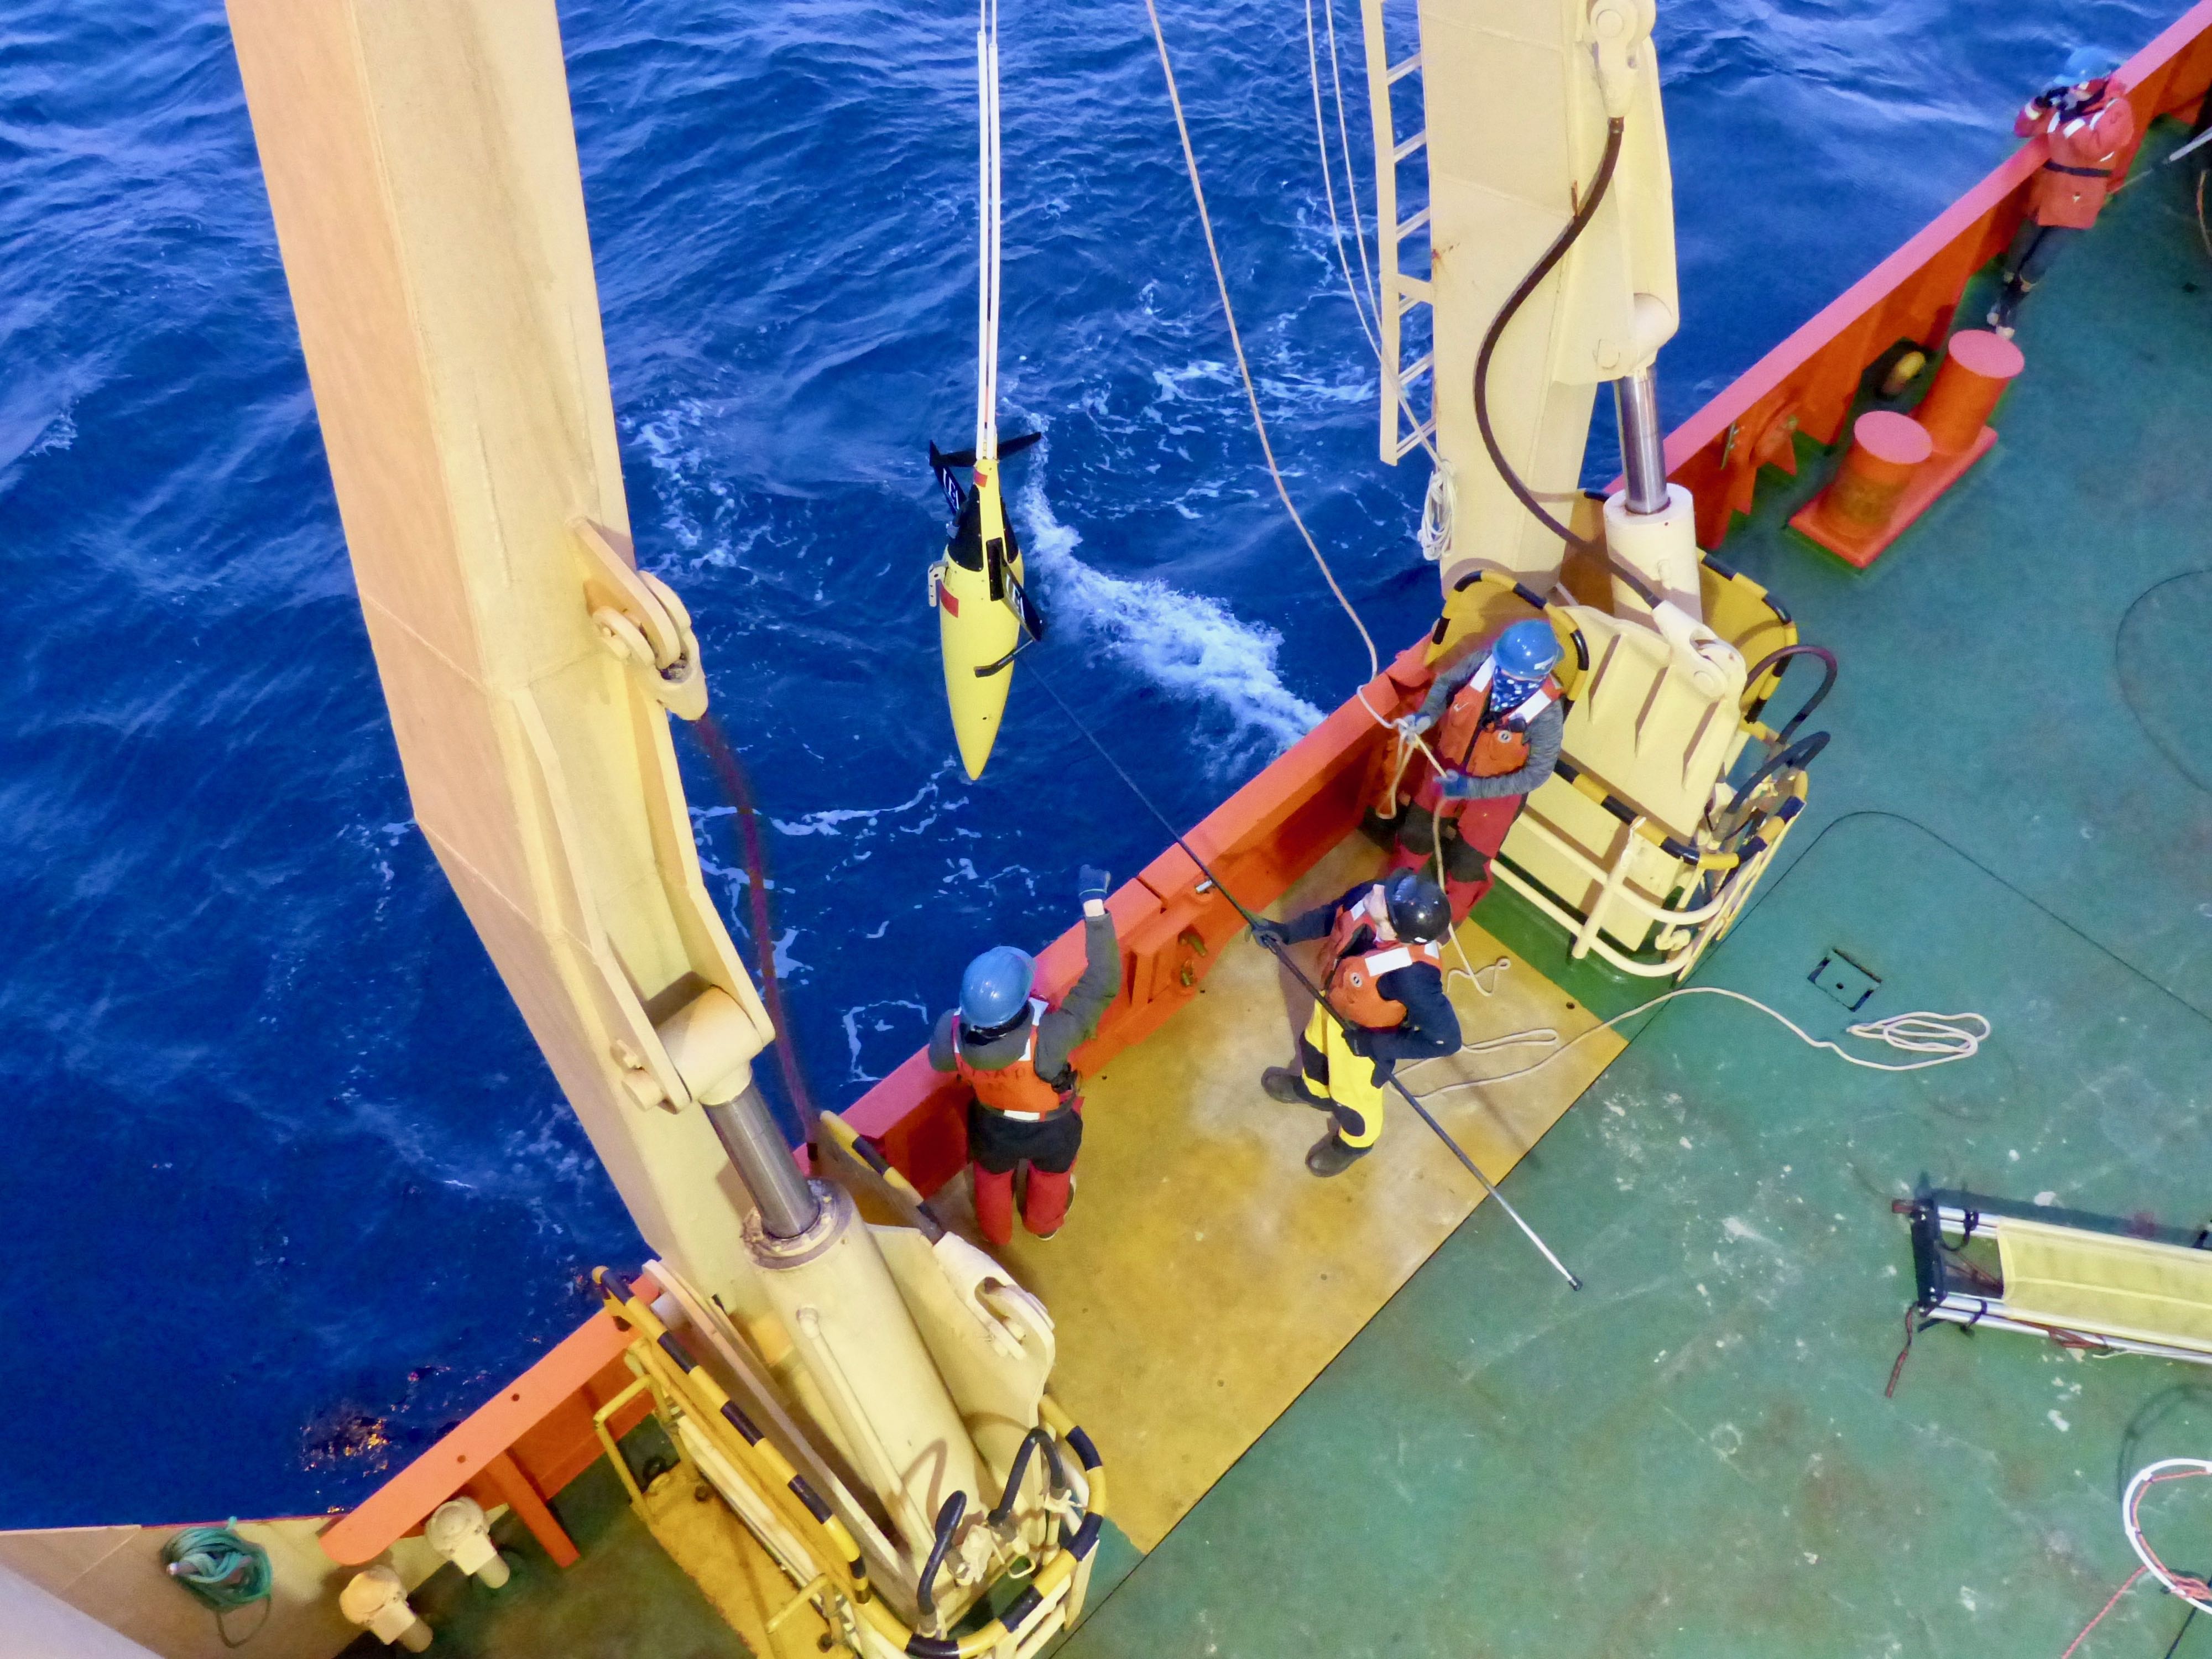 TARSAN scientist, Bastien Queste from the University of East Anglia (middle), deploys the ocean glider over the side of the Palmer with the assistance of Carmen Greto (left) and Jennie Mowatt (right). The glider conducted measurements for the next three days until it was recovered by the ship.